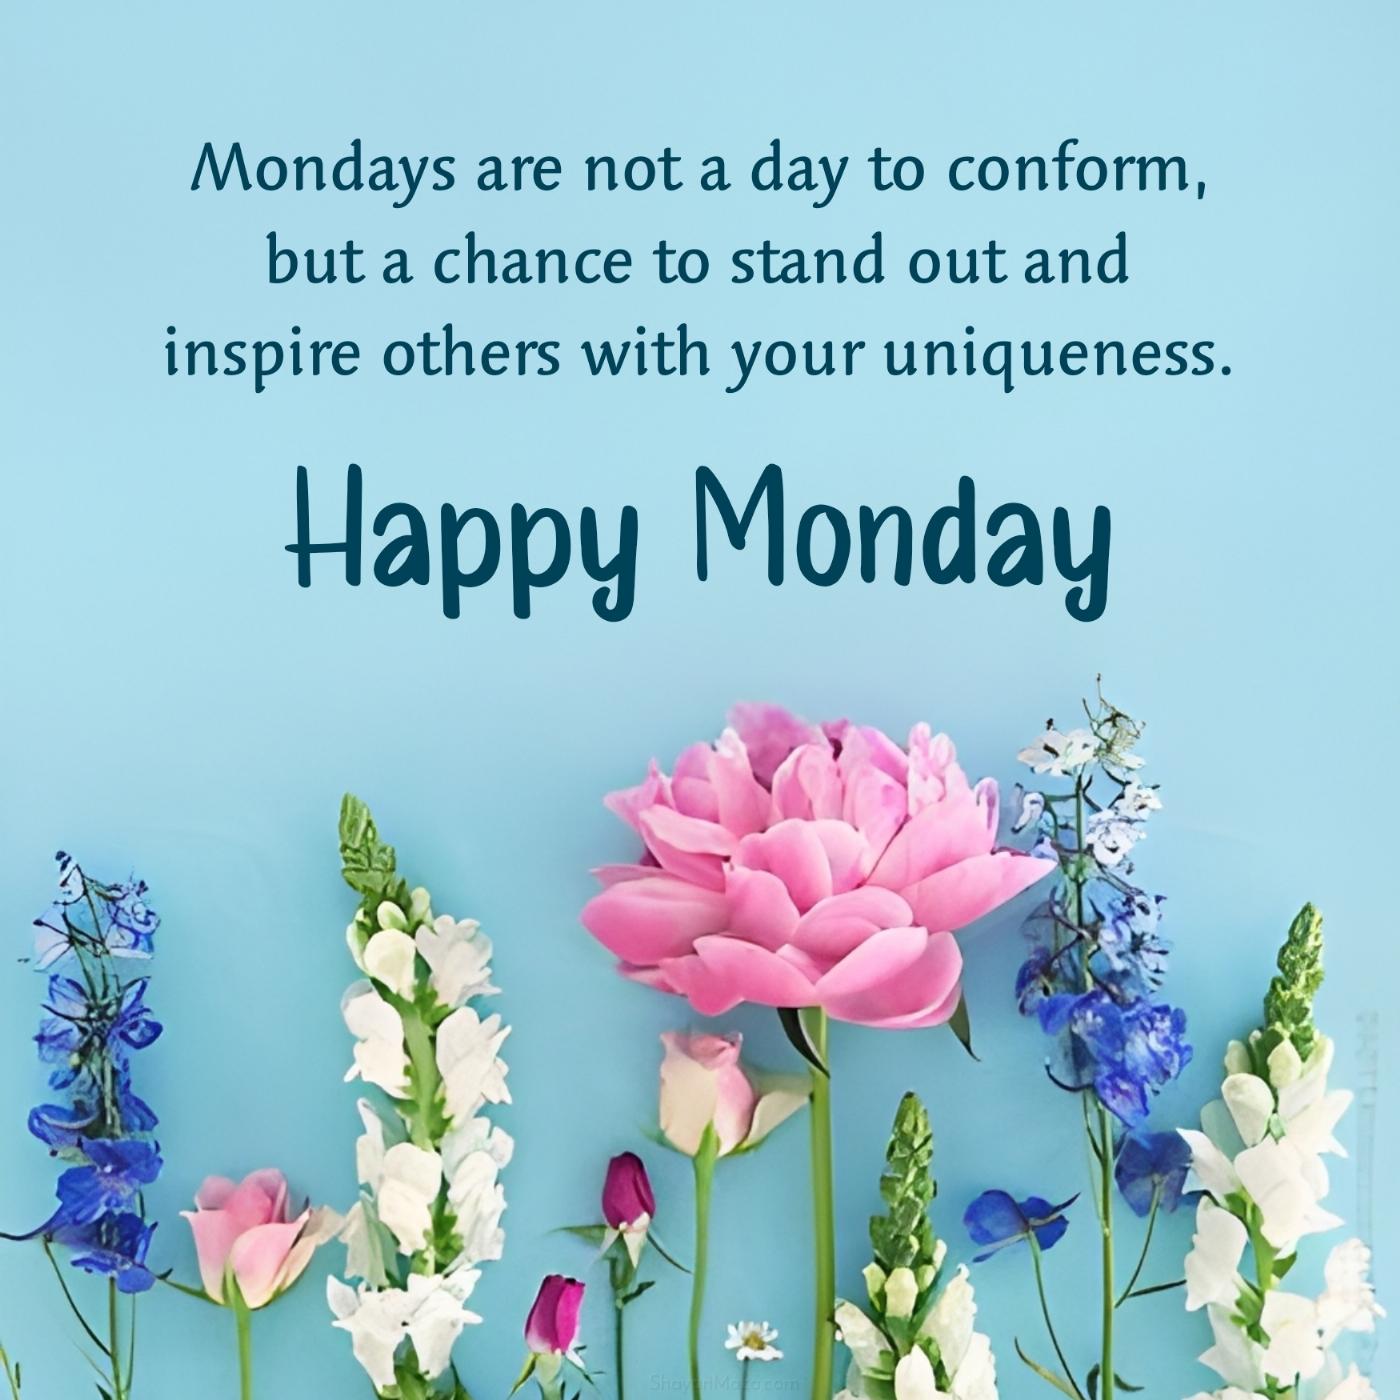 Mondays are not a day to conform but a chance to stand out